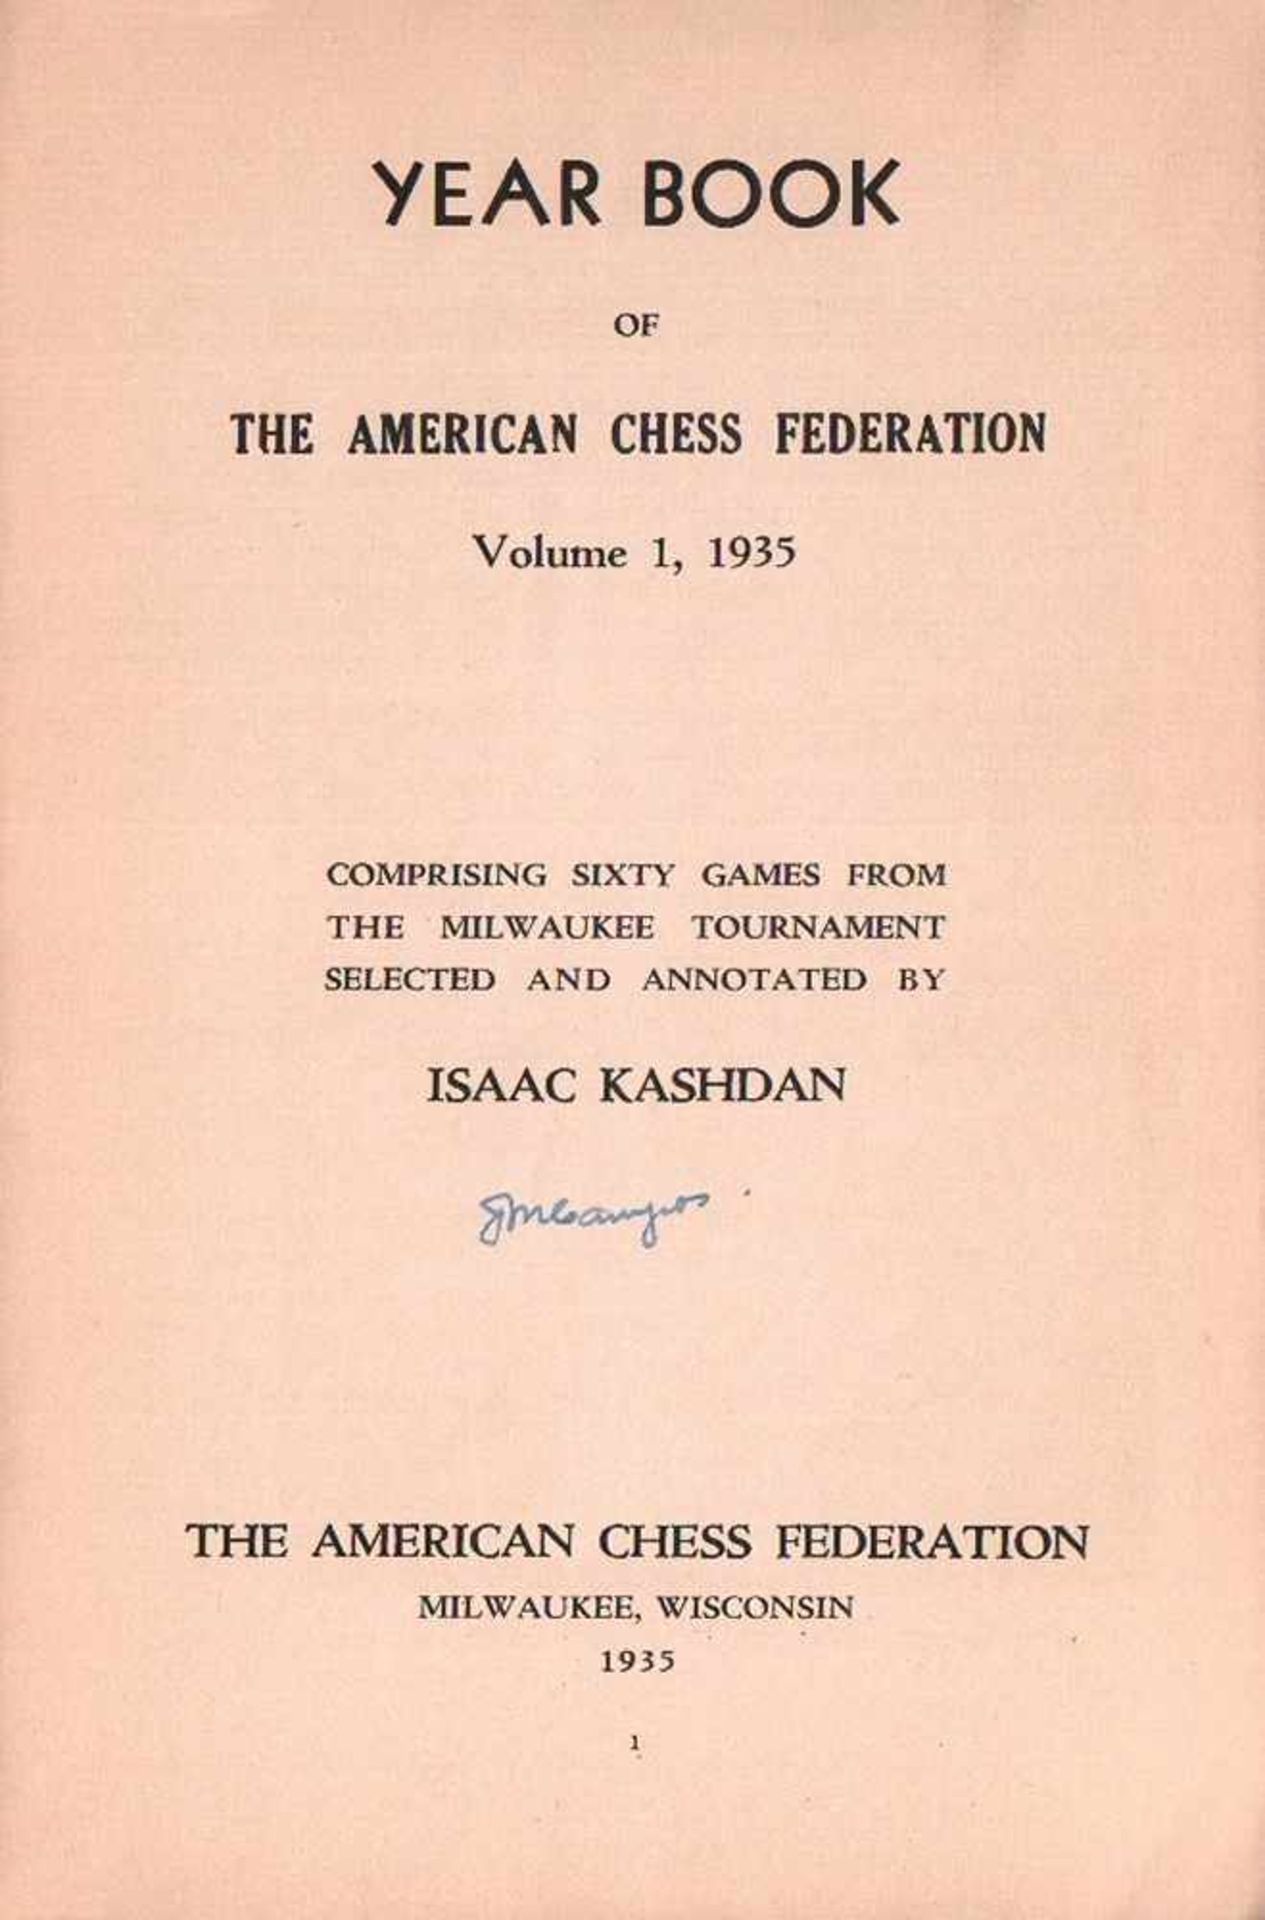 Milwaukee 1935.Year book of the American Chess Federation, Volume 1, 1935. Comprising sixty games